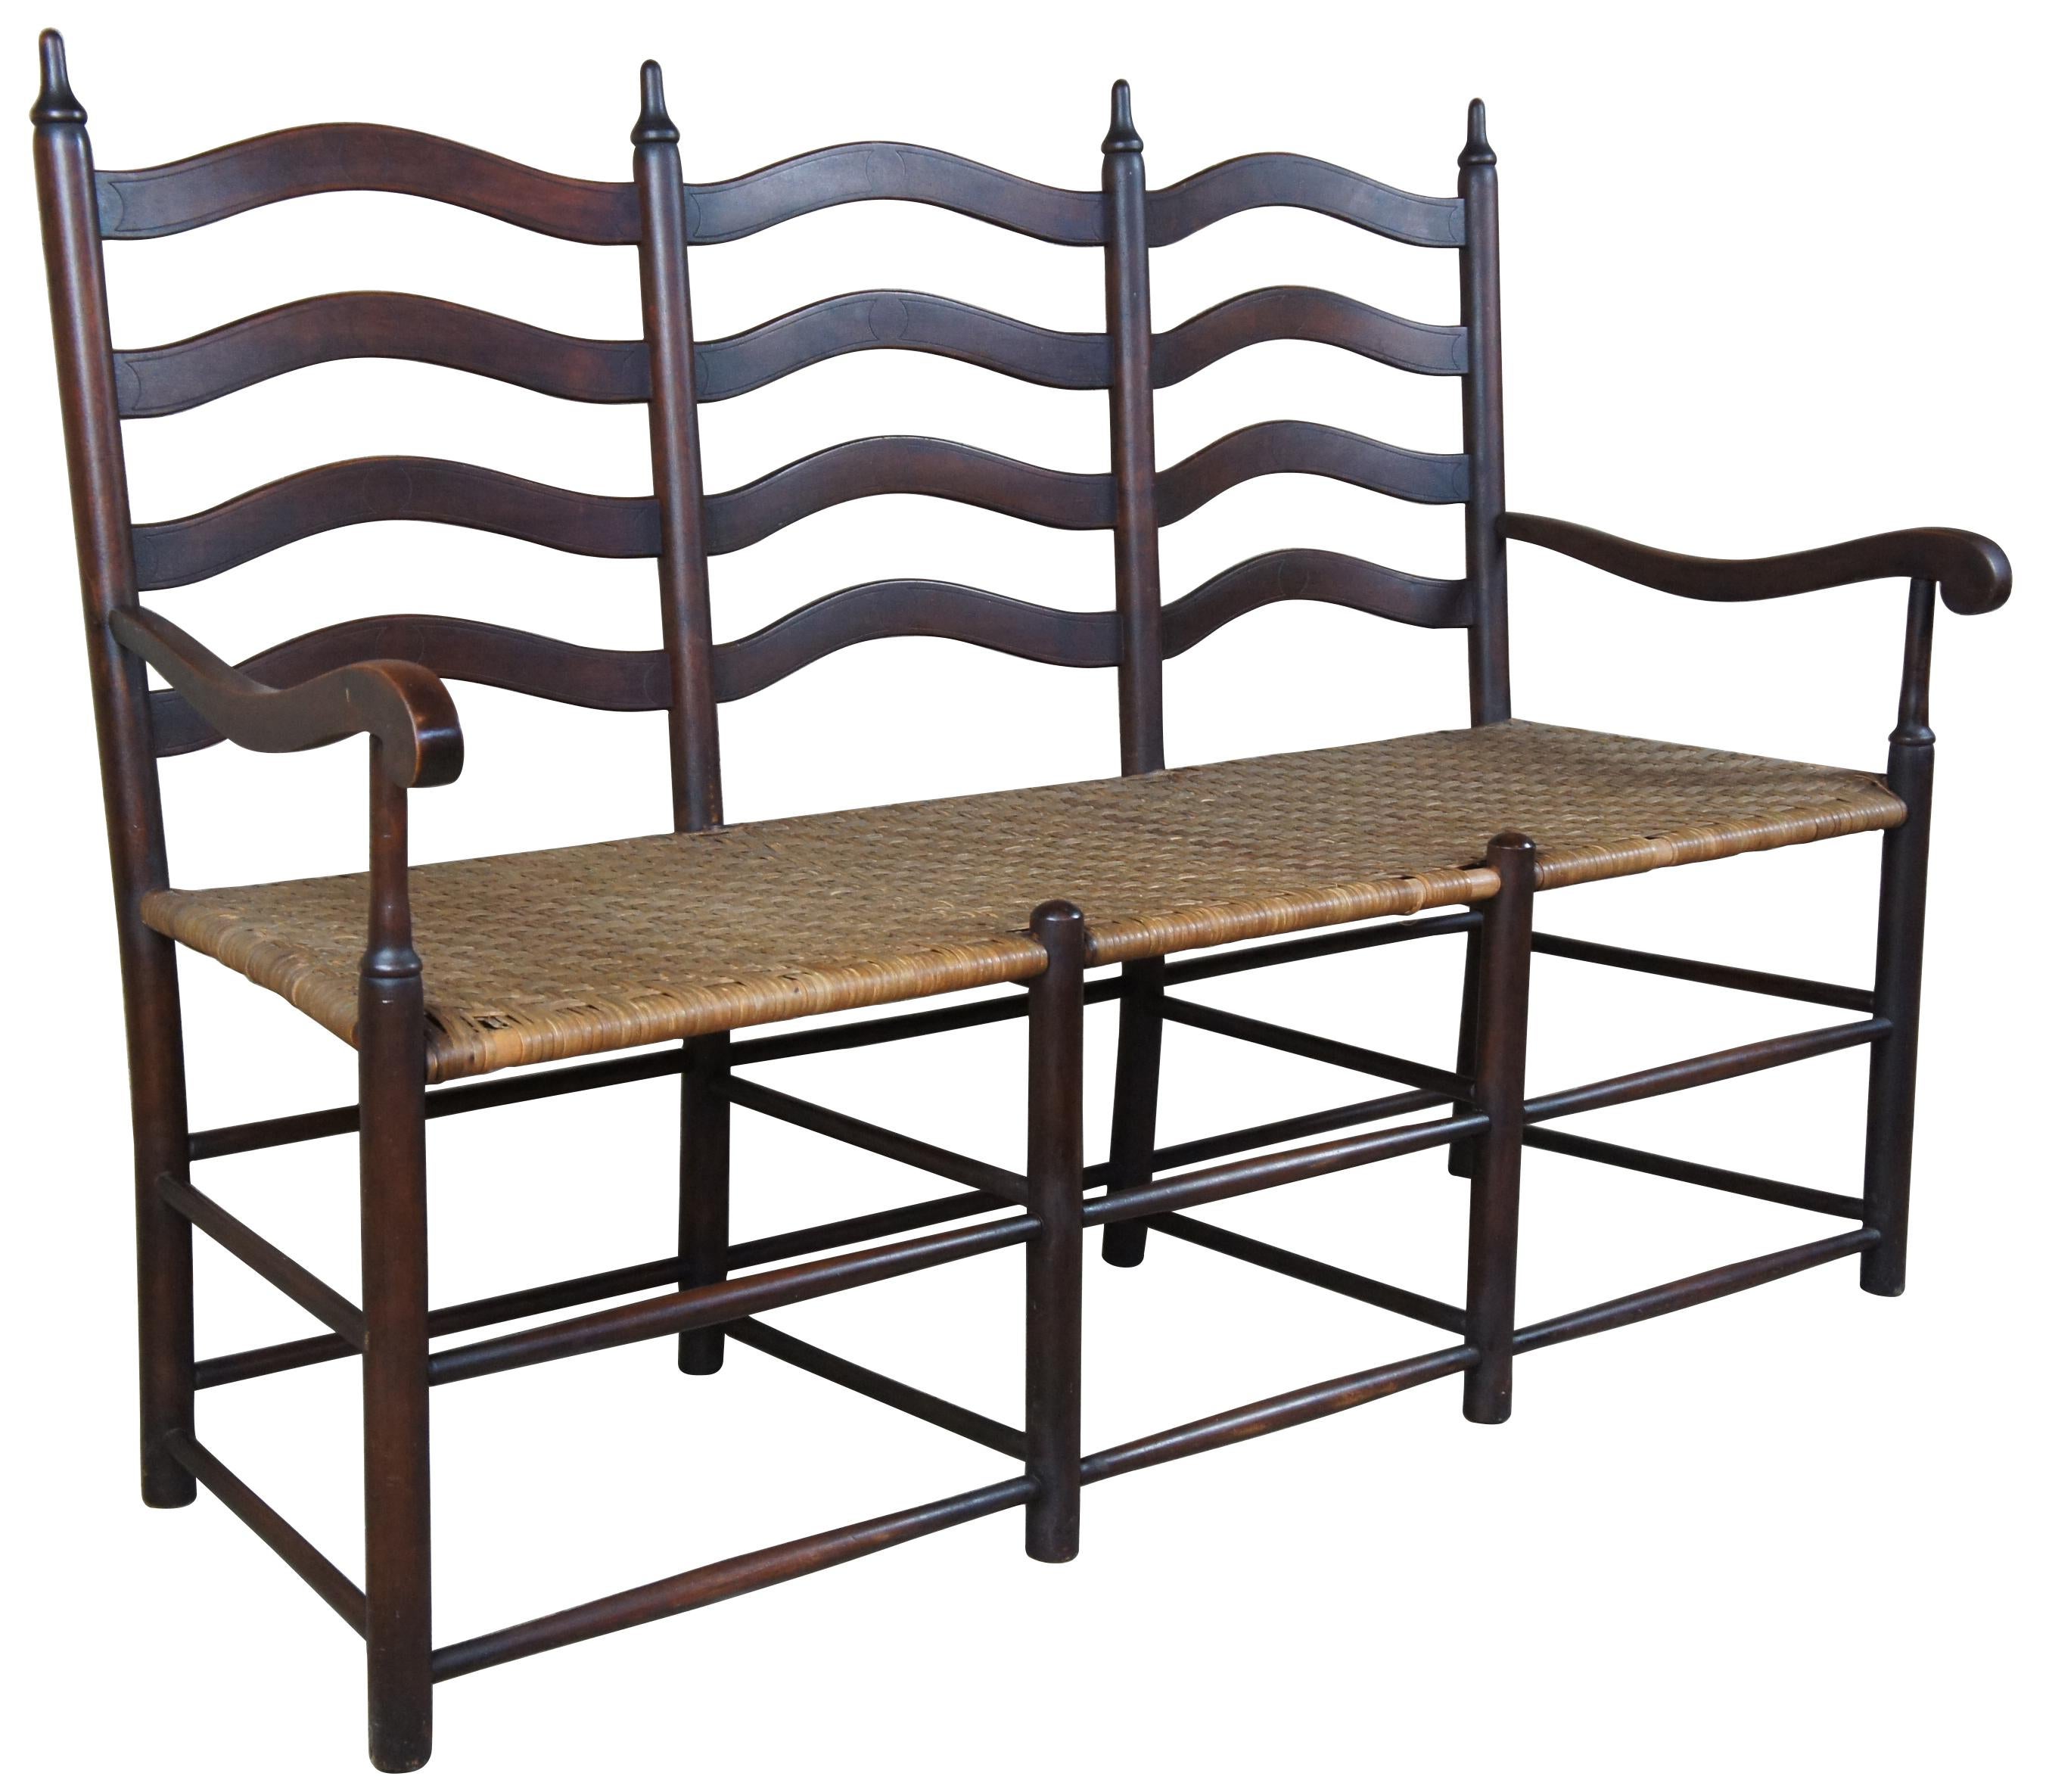 20th century pine Shaker style bench. A three-seat with ladder back design. Features turned finials and rattan seat.
      